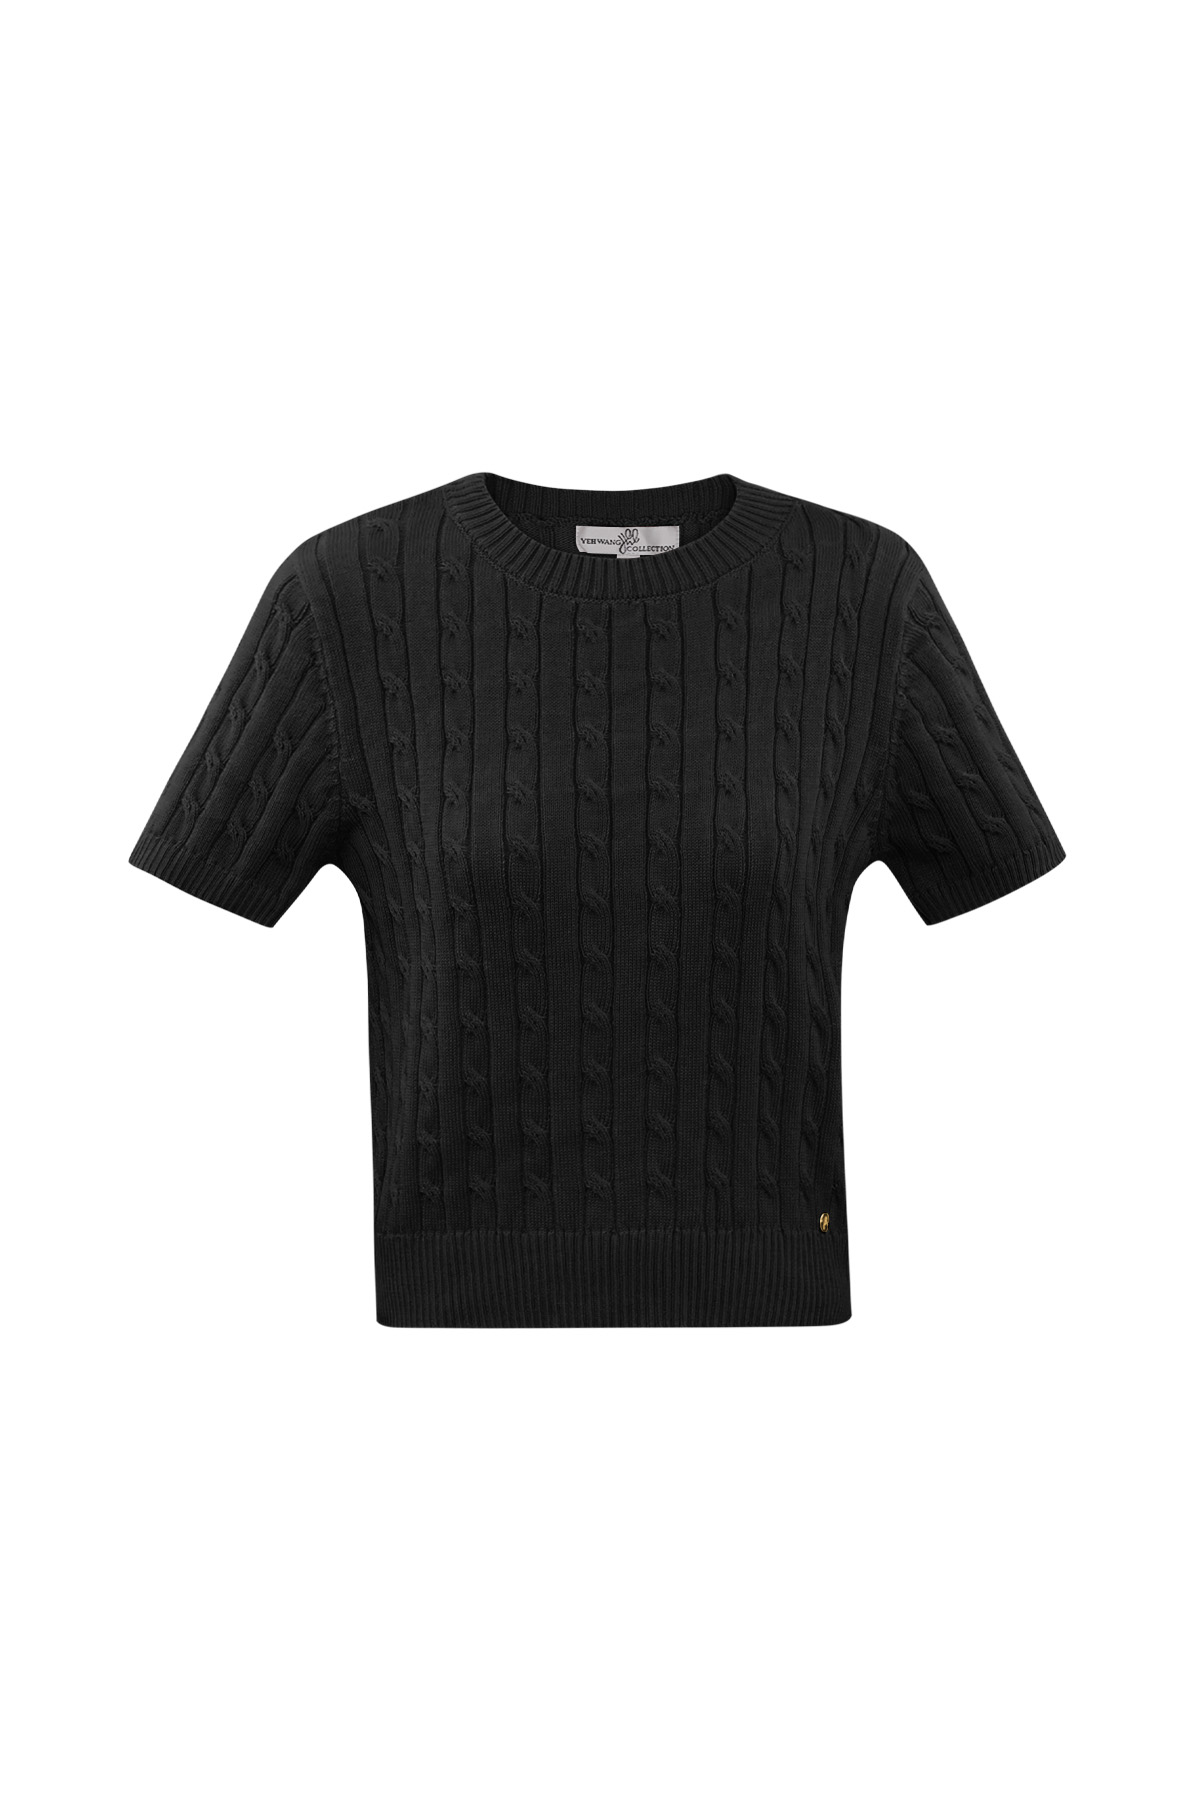 Knitted sweater with cables and short sleeves small/medium – black 